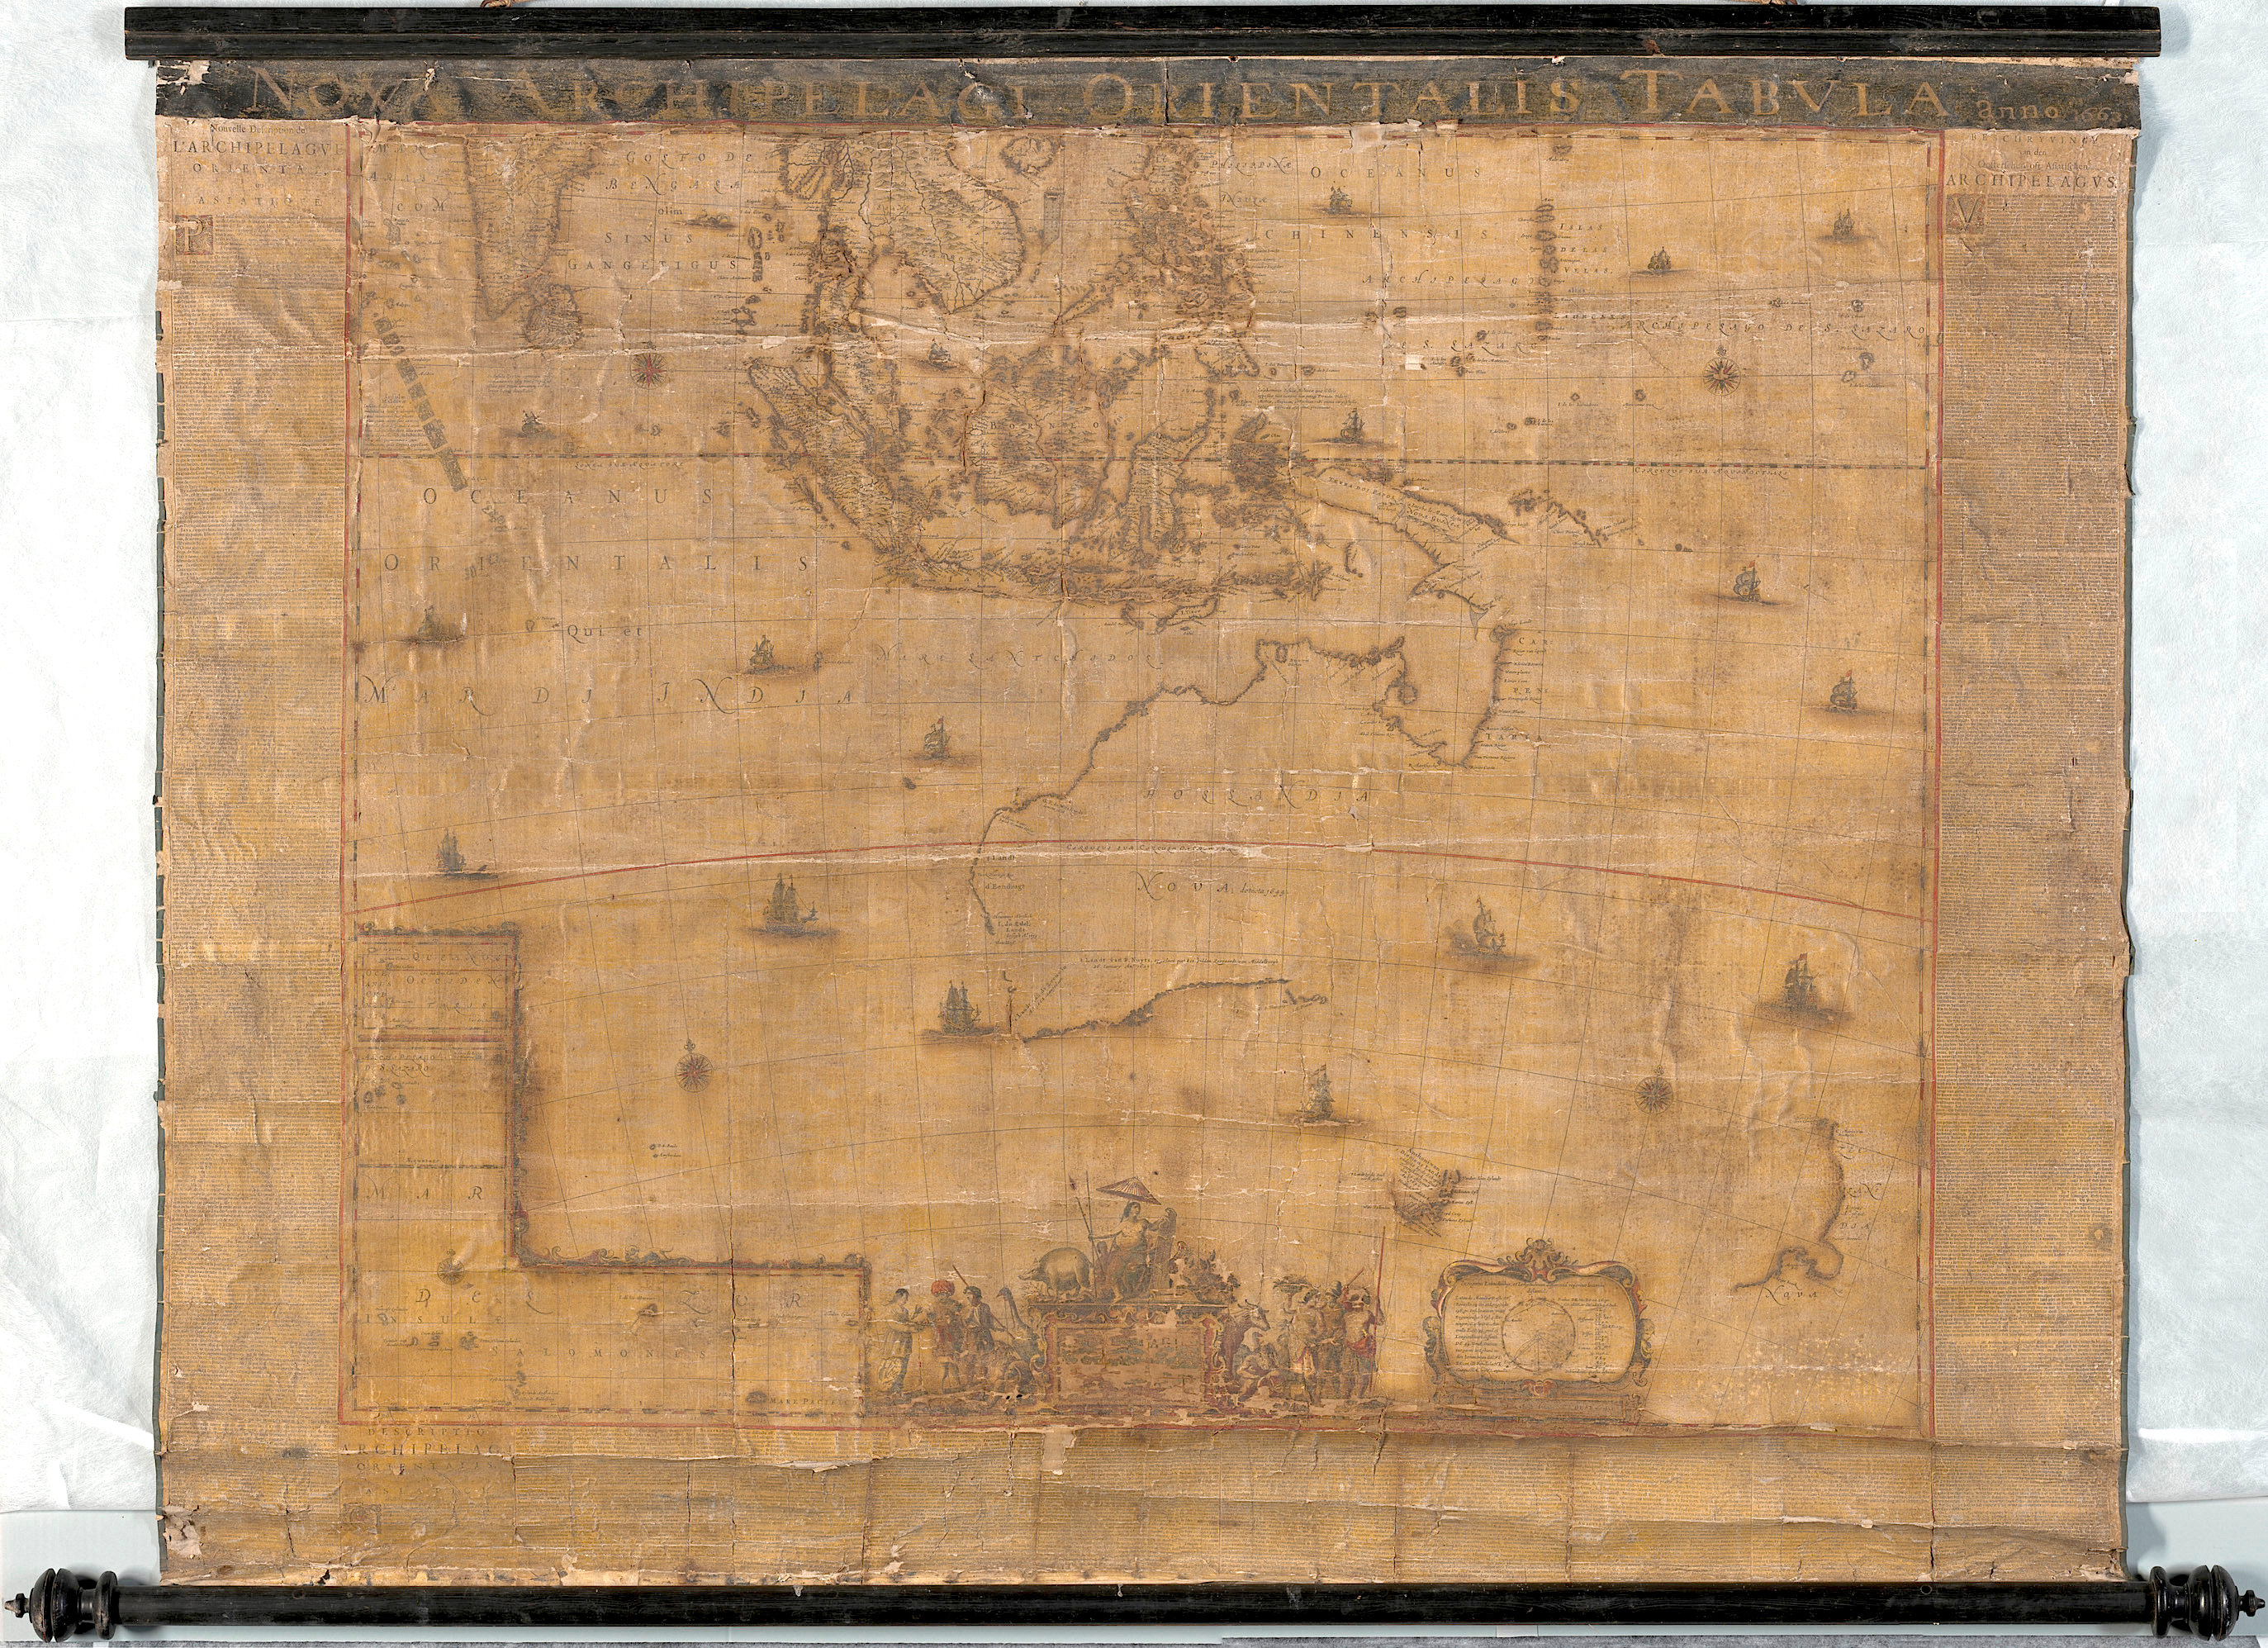 Australia can breathe easy after 17th century map restored